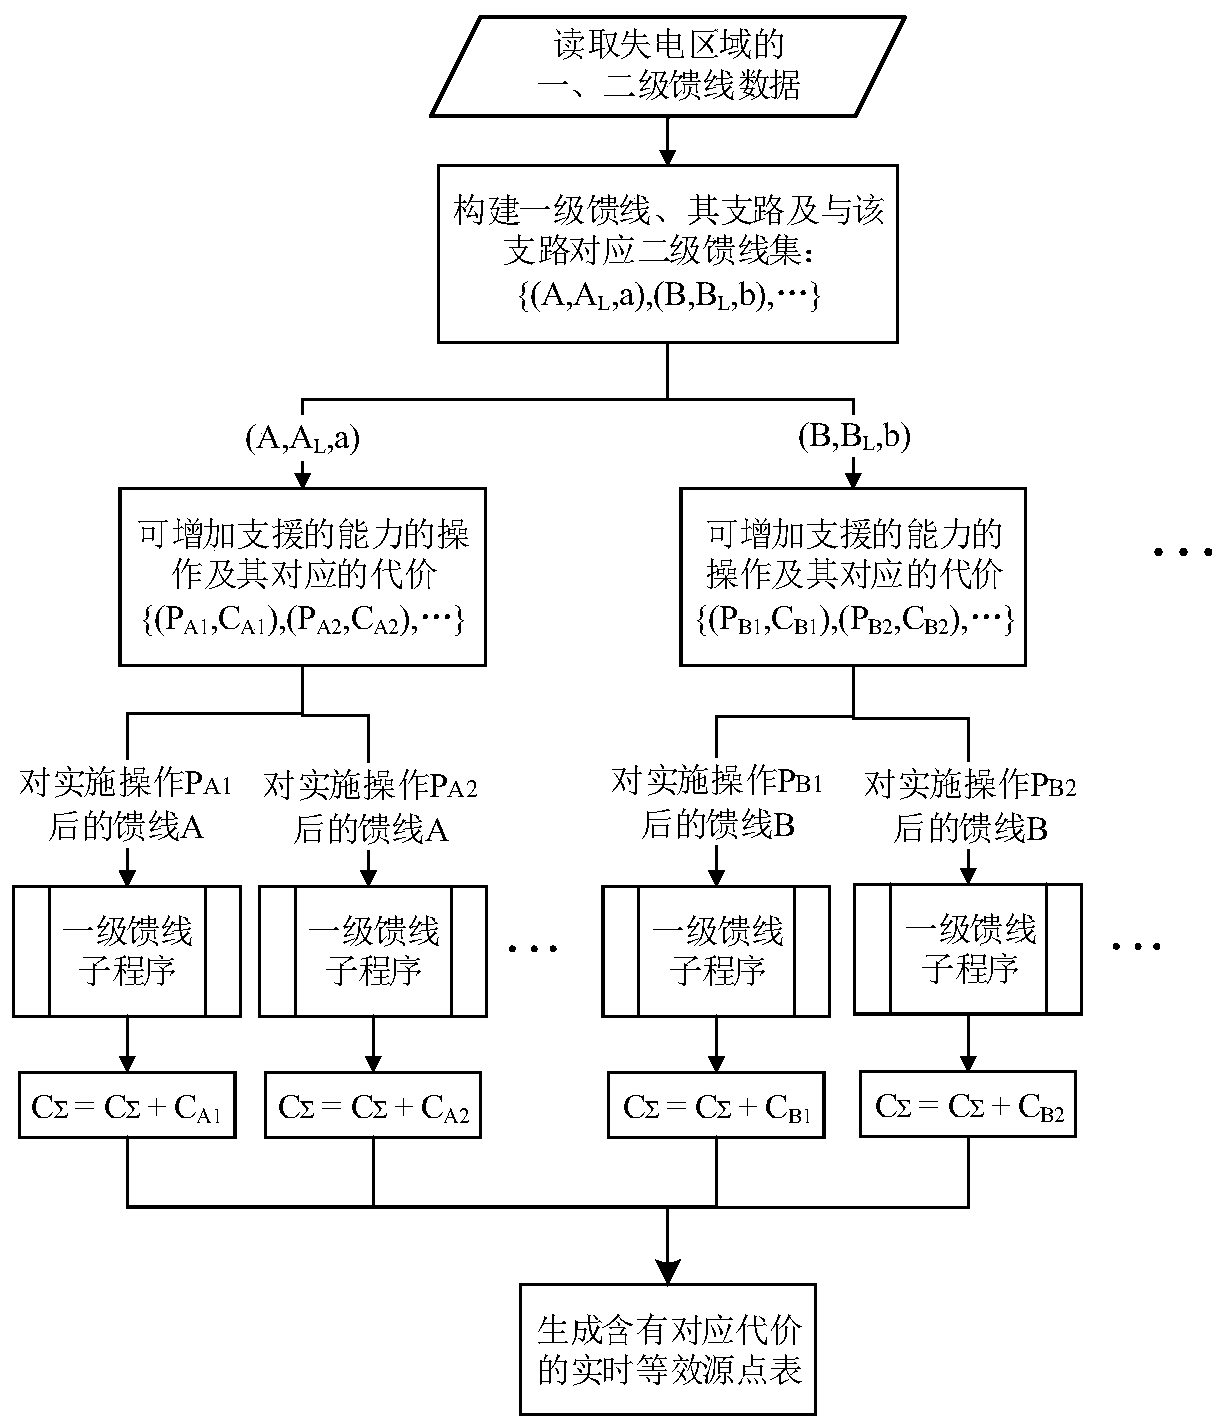 Power Restoration Method Based on Network Equivalence and Parallelization